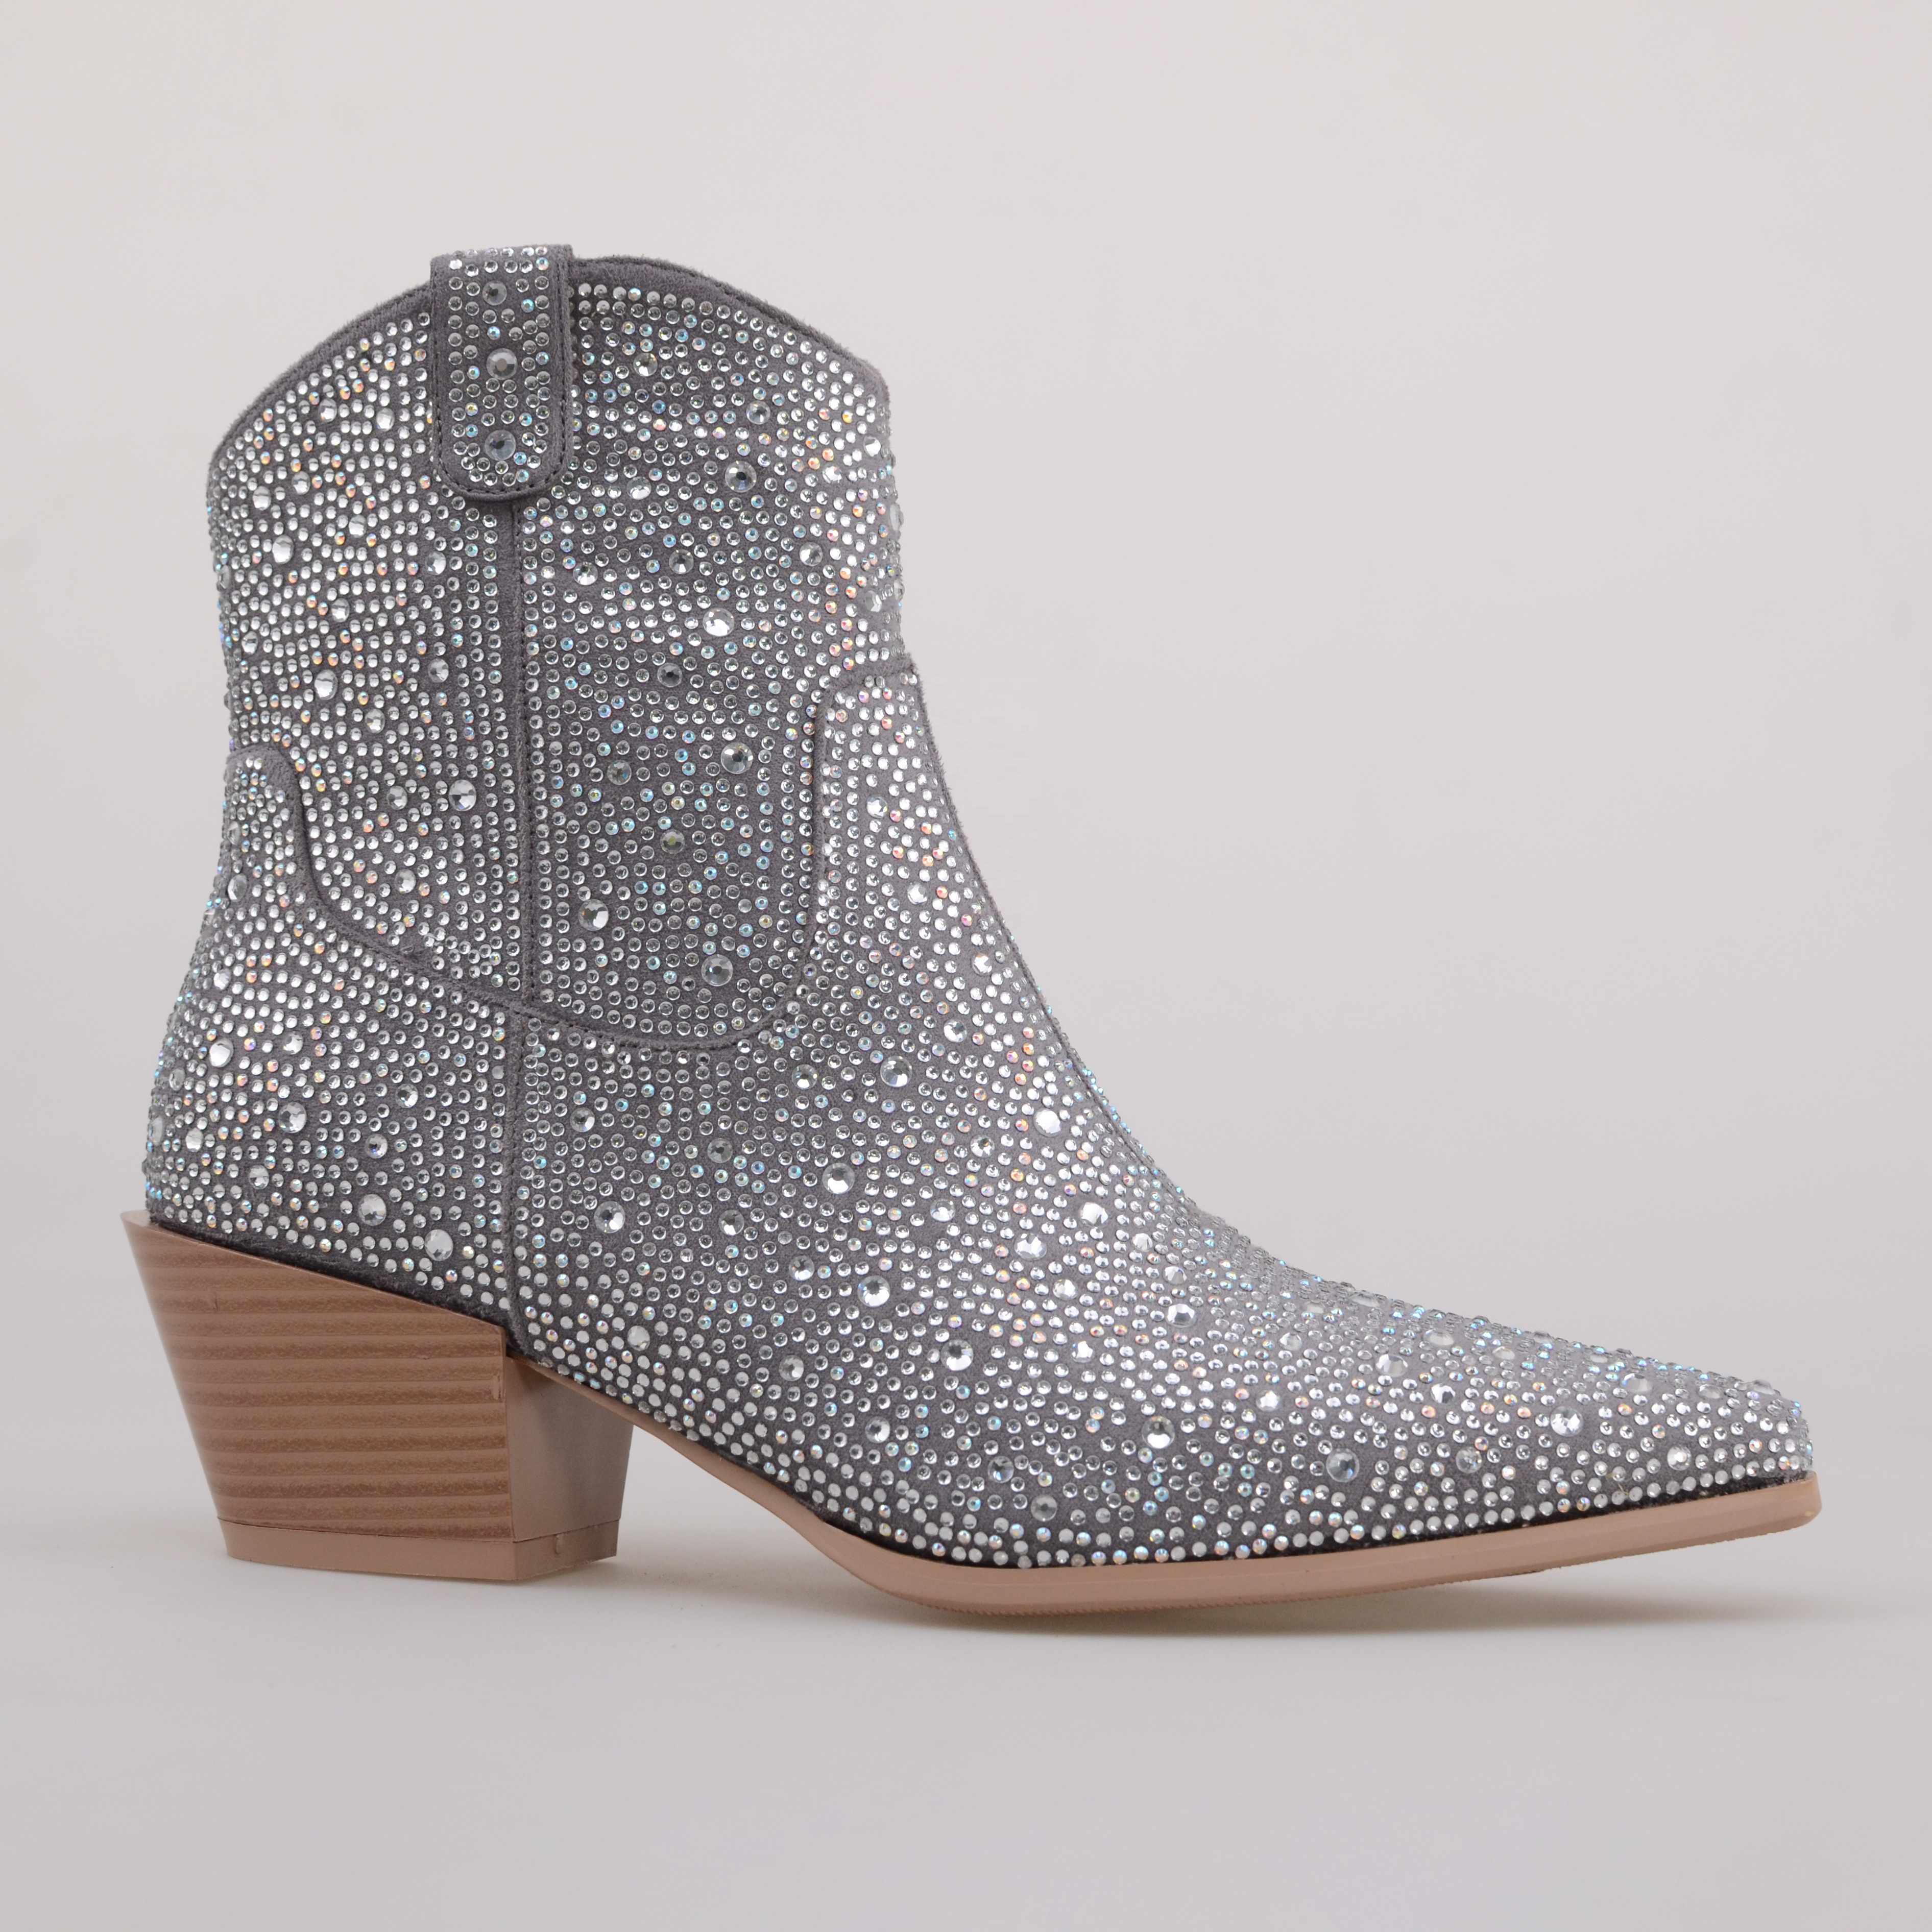 TAAFO Full Of Bright Rehine Stone Cowboy Silver Middle-calf Block Heel Boots Pointed Toe Chunky Heel